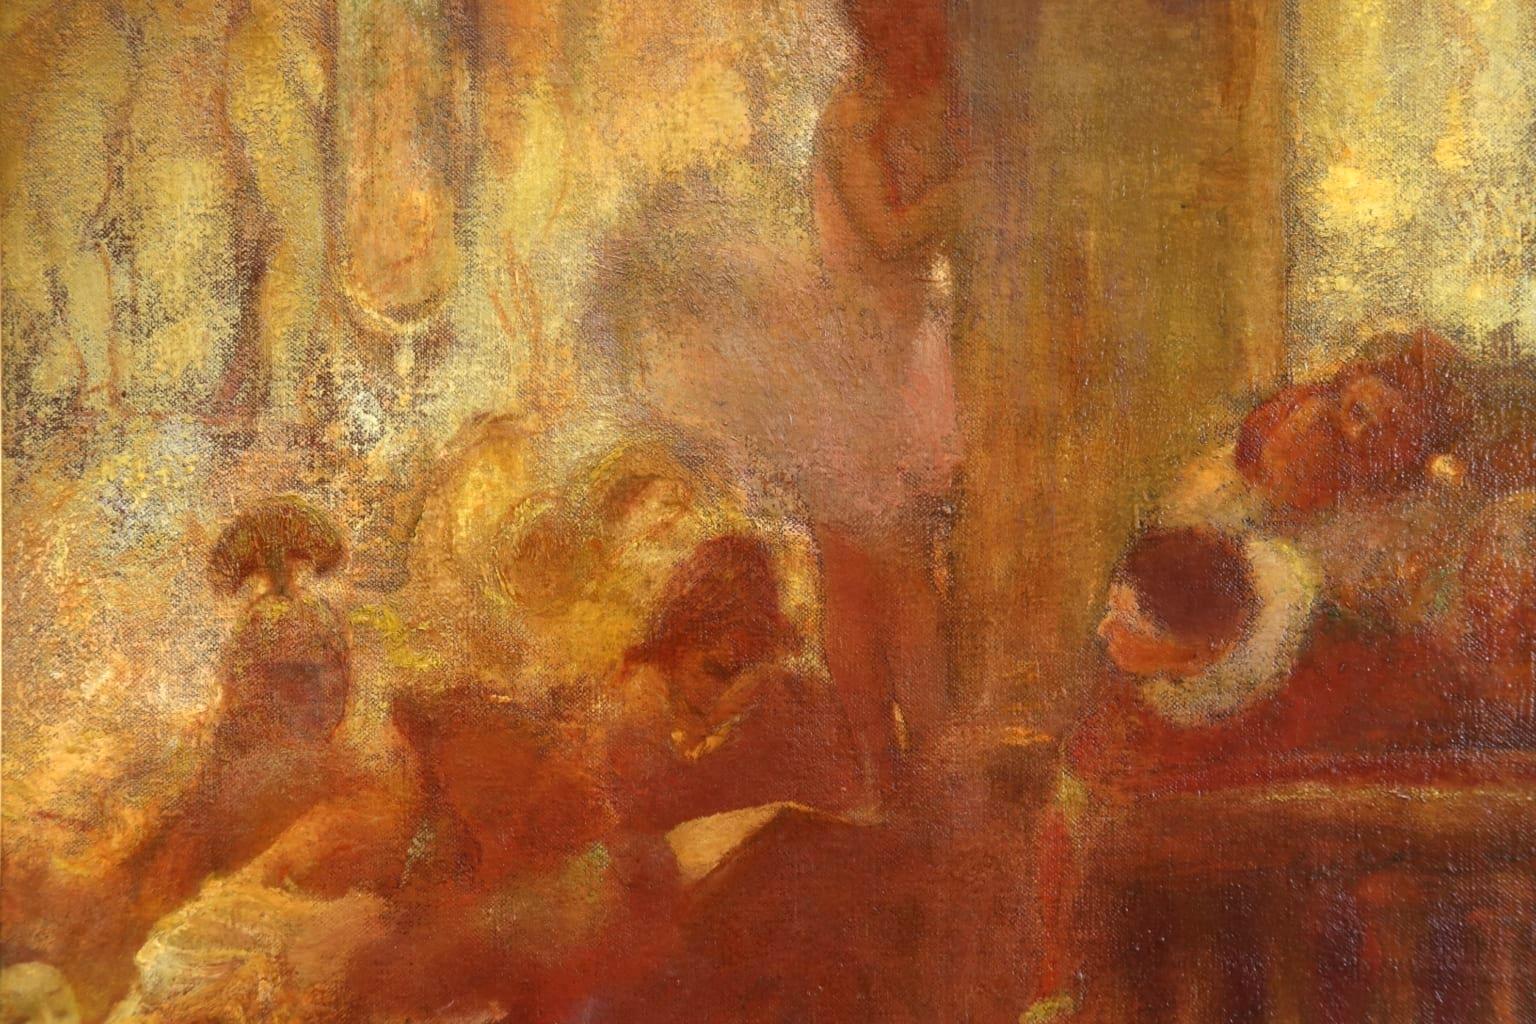 A wonderful oil on canvas by French impressionist painter Gaston La Touche depicting performers in a Commedia dell'arte - a popular form of theatre characterised by masked actors who perform sketches. 

Signature:
Signed & dated 1899 lower